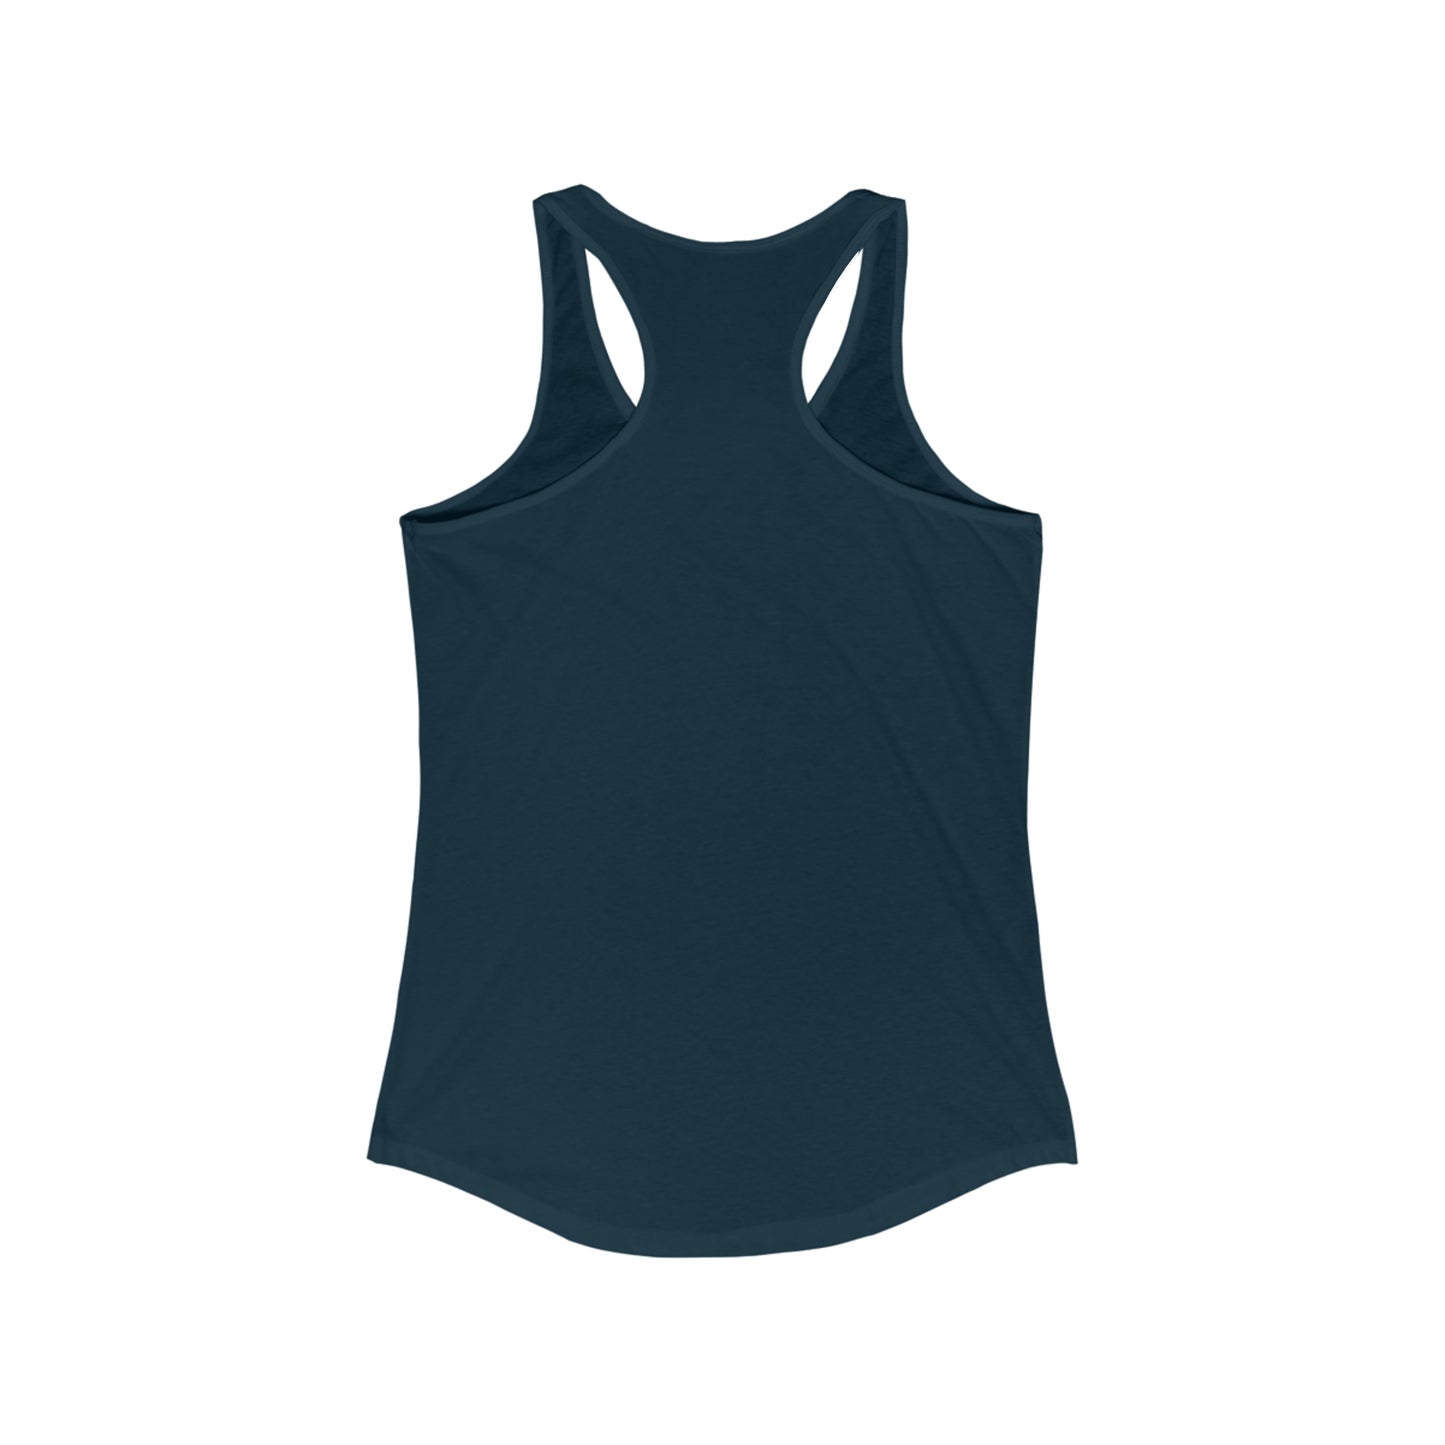 Hot Wife Summer Tank for fitness gym & every day wear